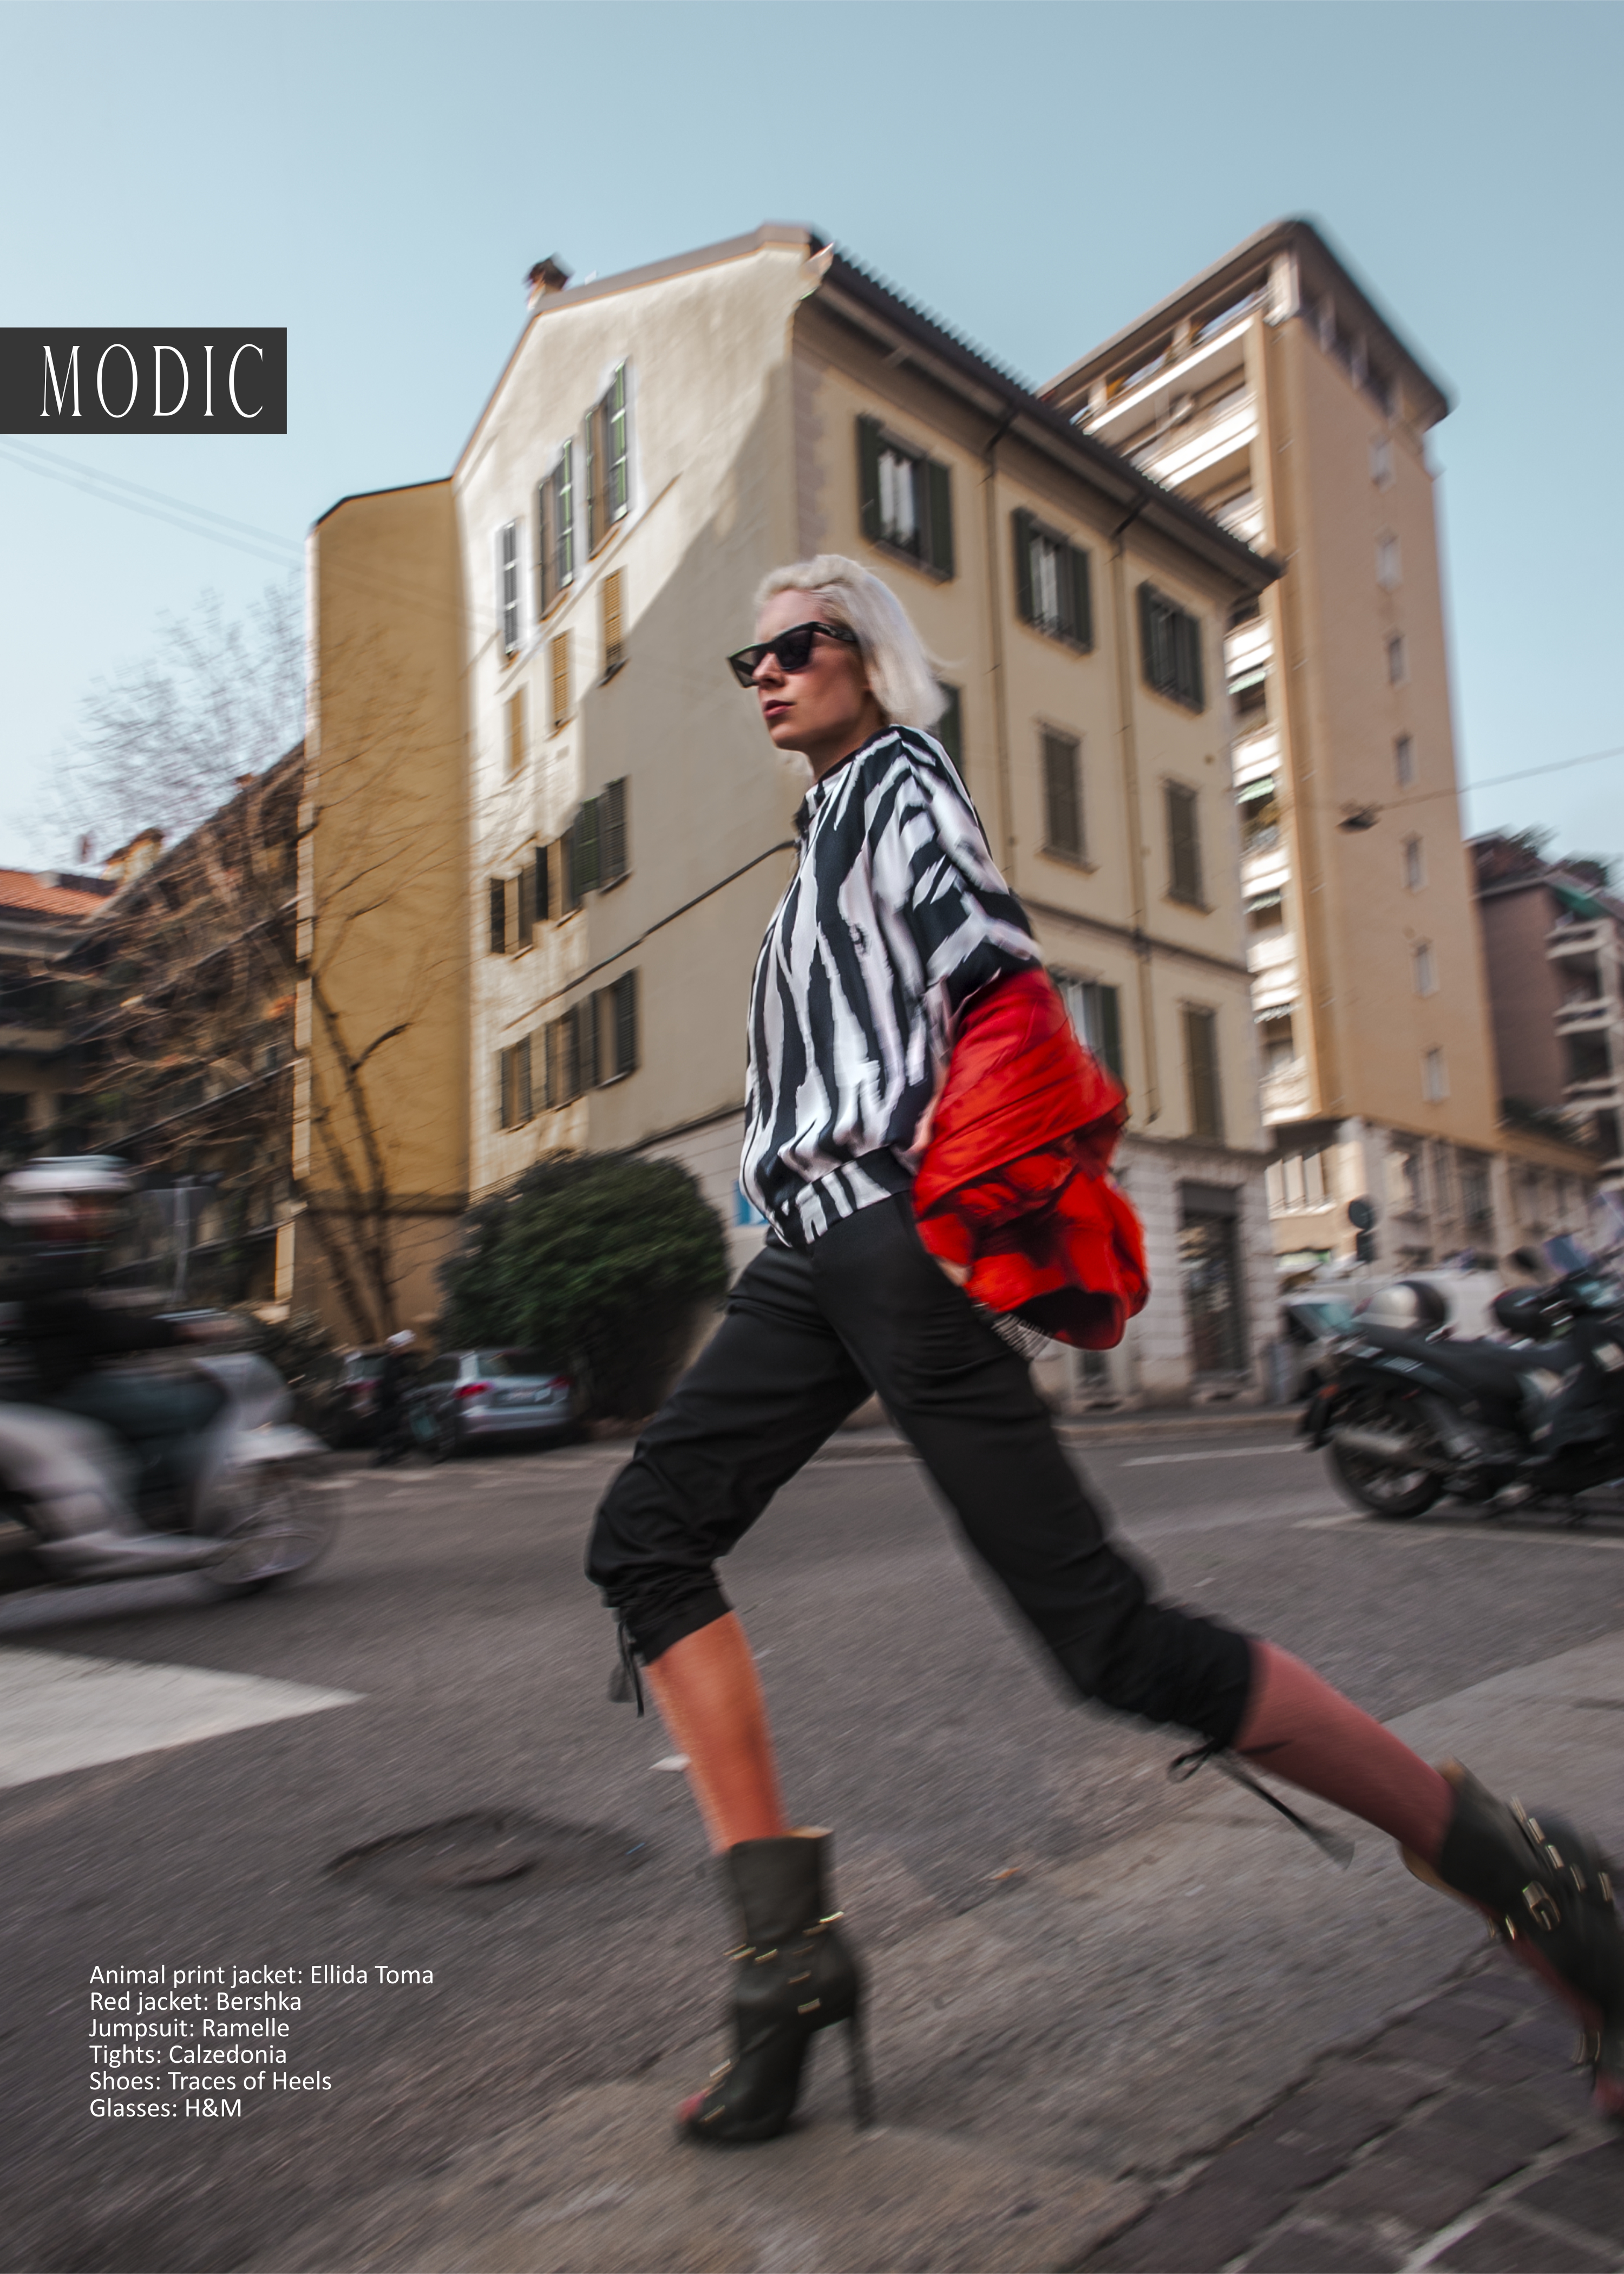 Modic Editorial: Taking the Streets of Milan to the Chicest Level